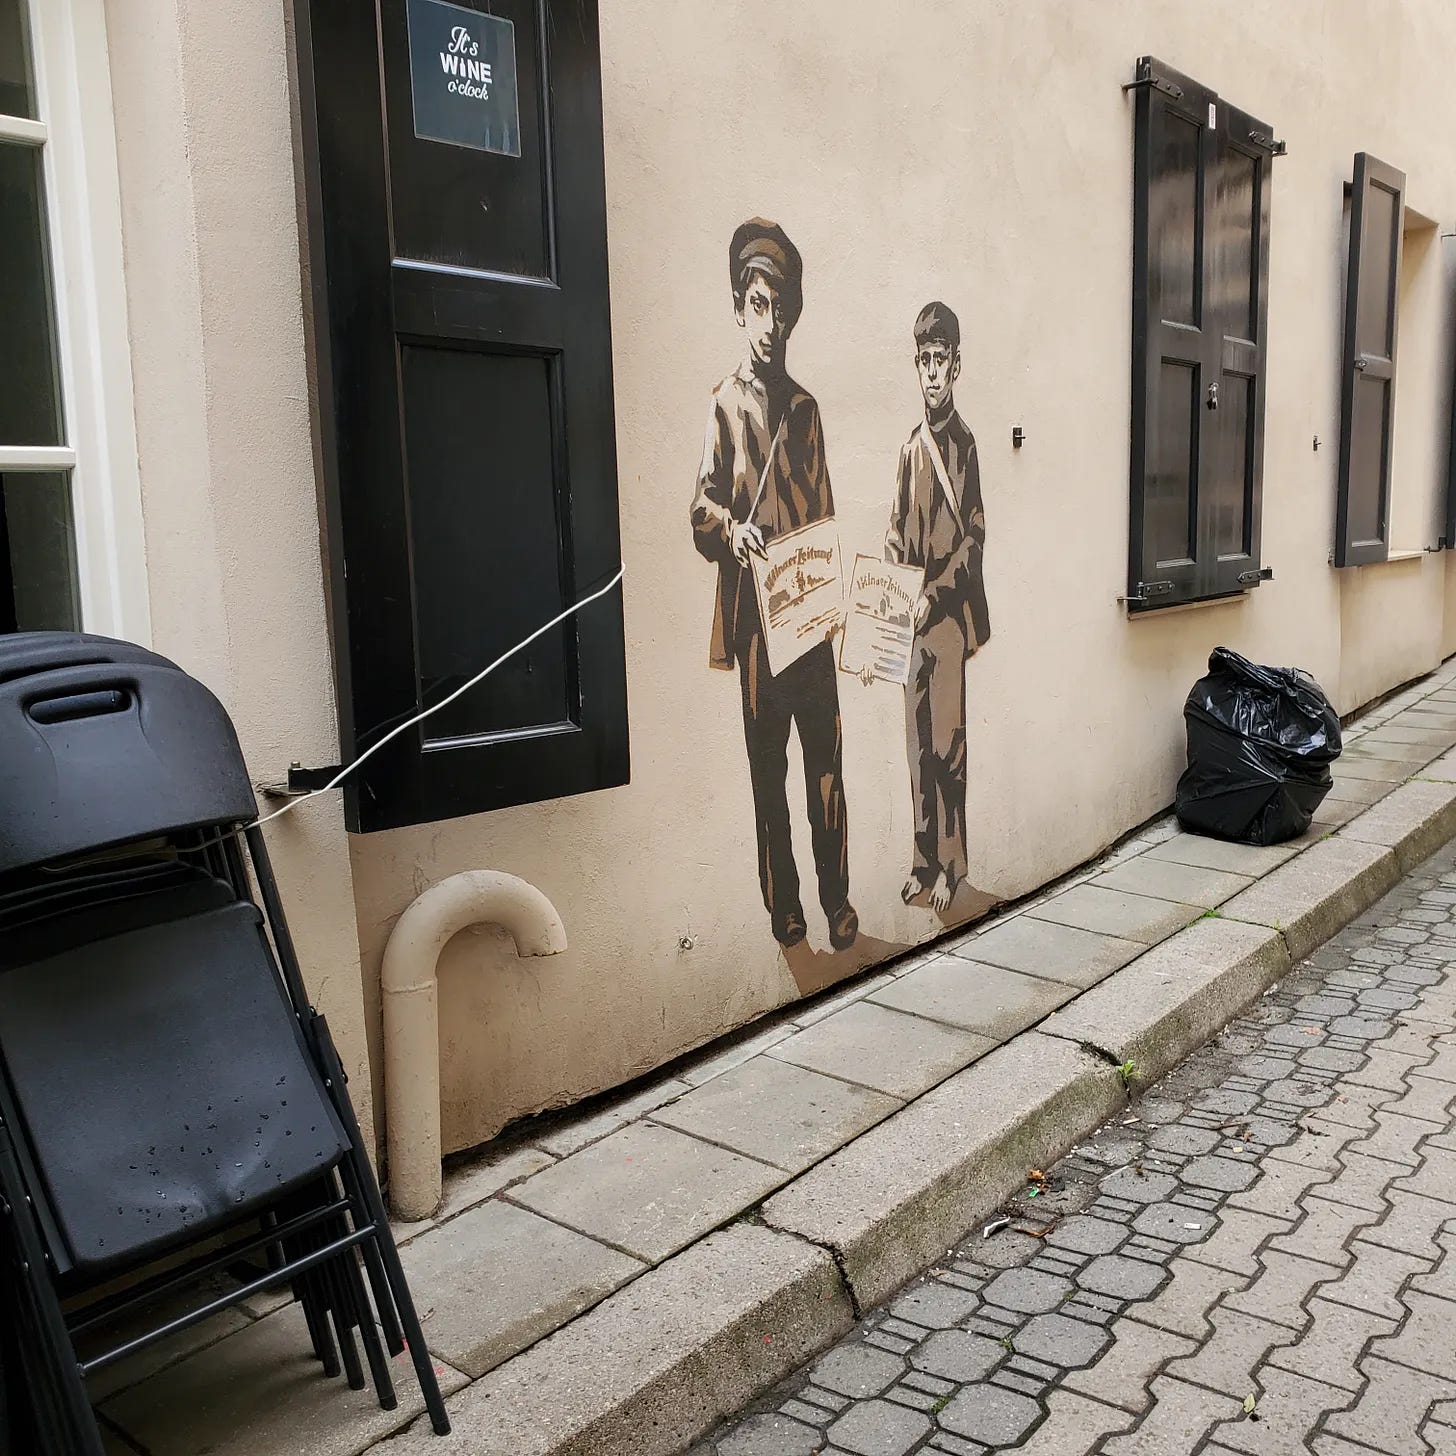 A mural of two small boys selling newspapers.